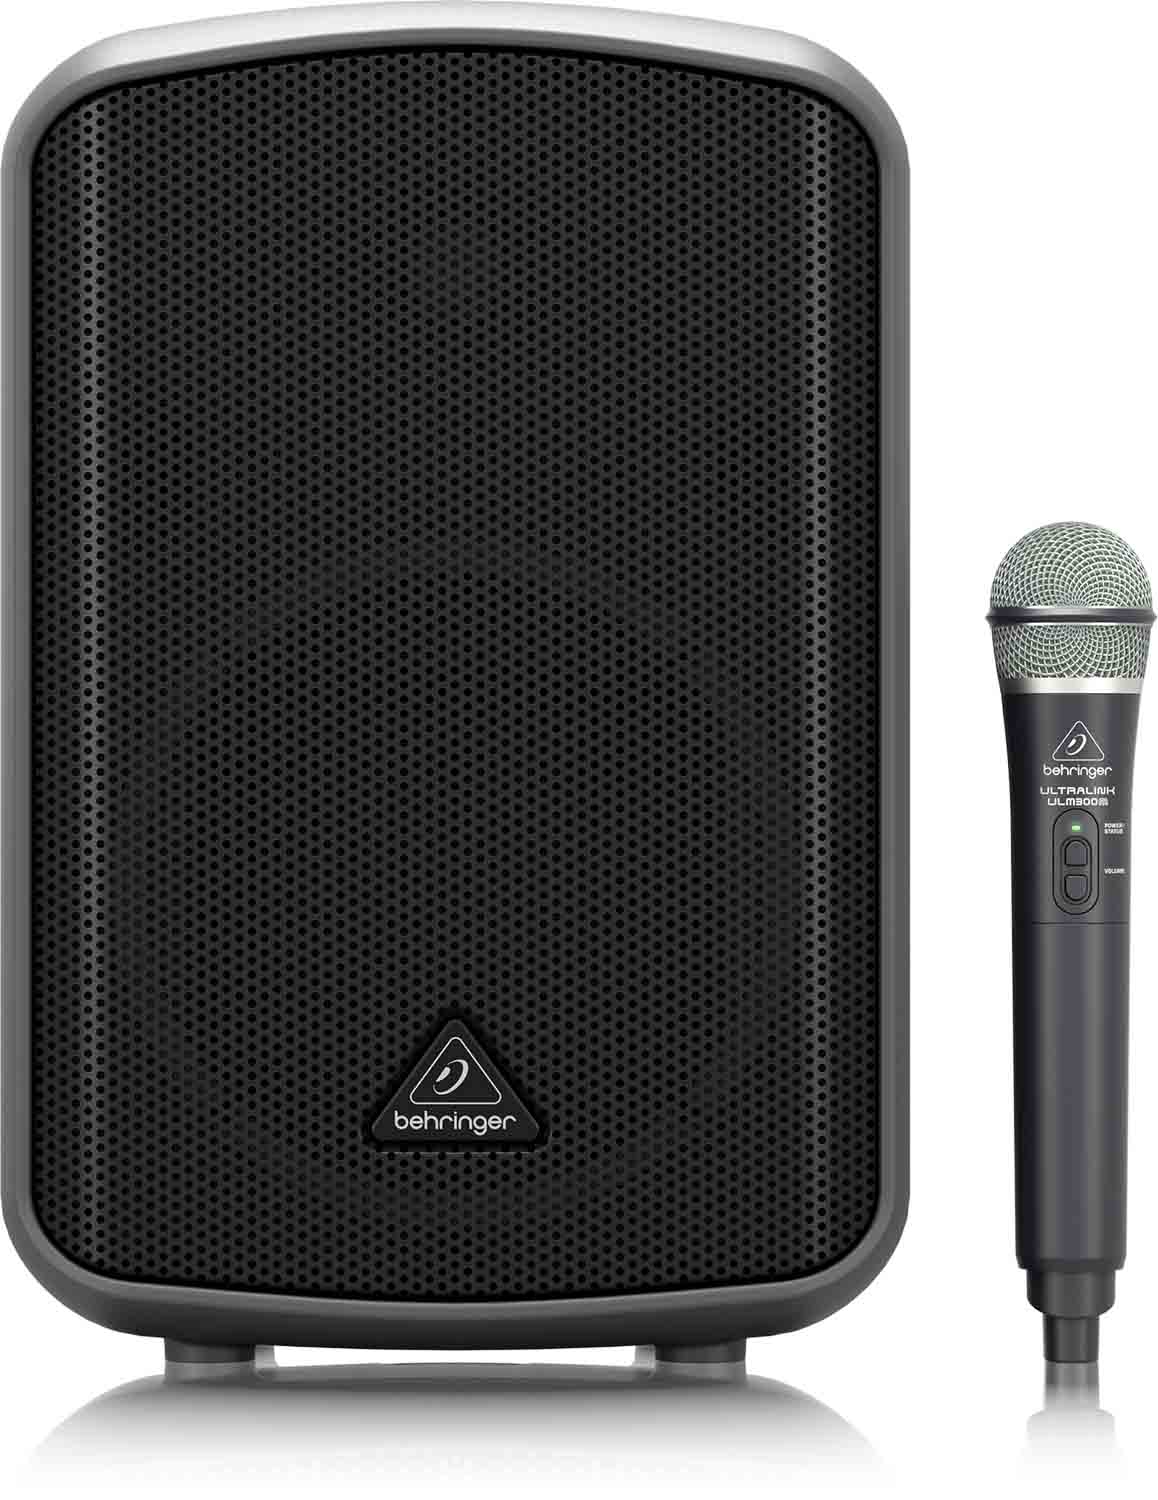 Open Box: Behringer MPA200BT All-in-One Portable 200W Speaker With Wireless Mic and Bluetooth - Hollywood DJ